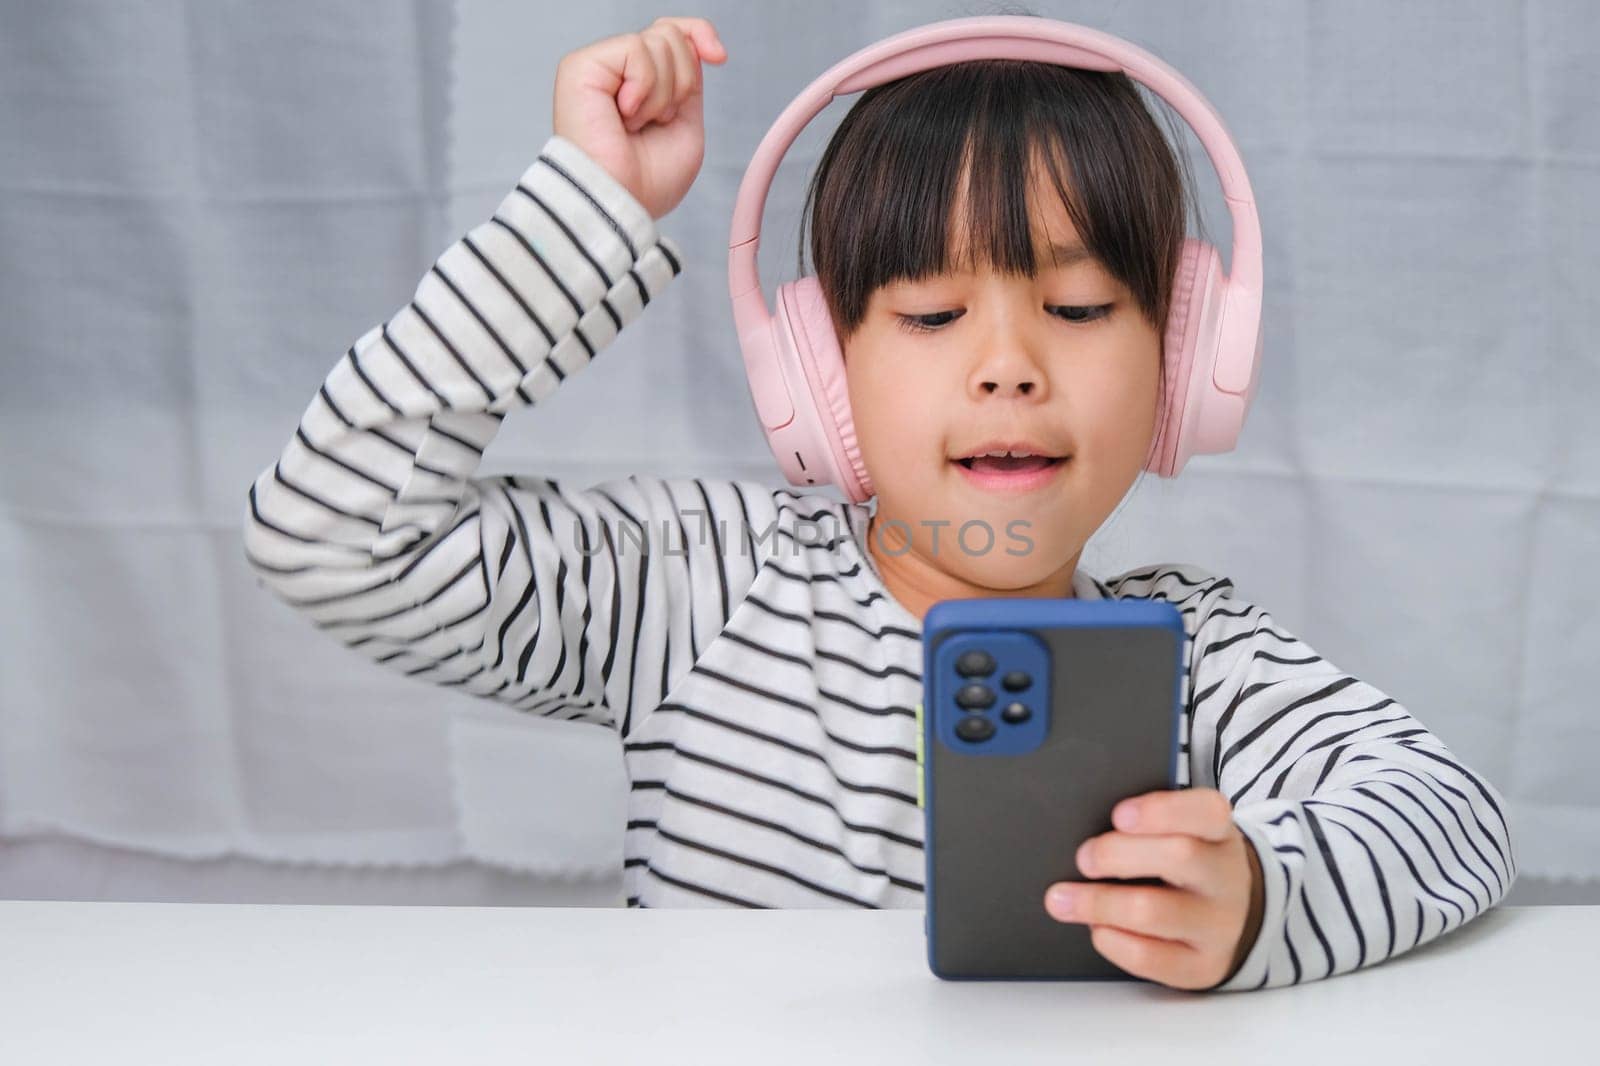 Cute elementary school girl wearing headphones holding a smartphone. Happy Asian girl studying online on smartphone or homeschooling, listening to music or playing games.